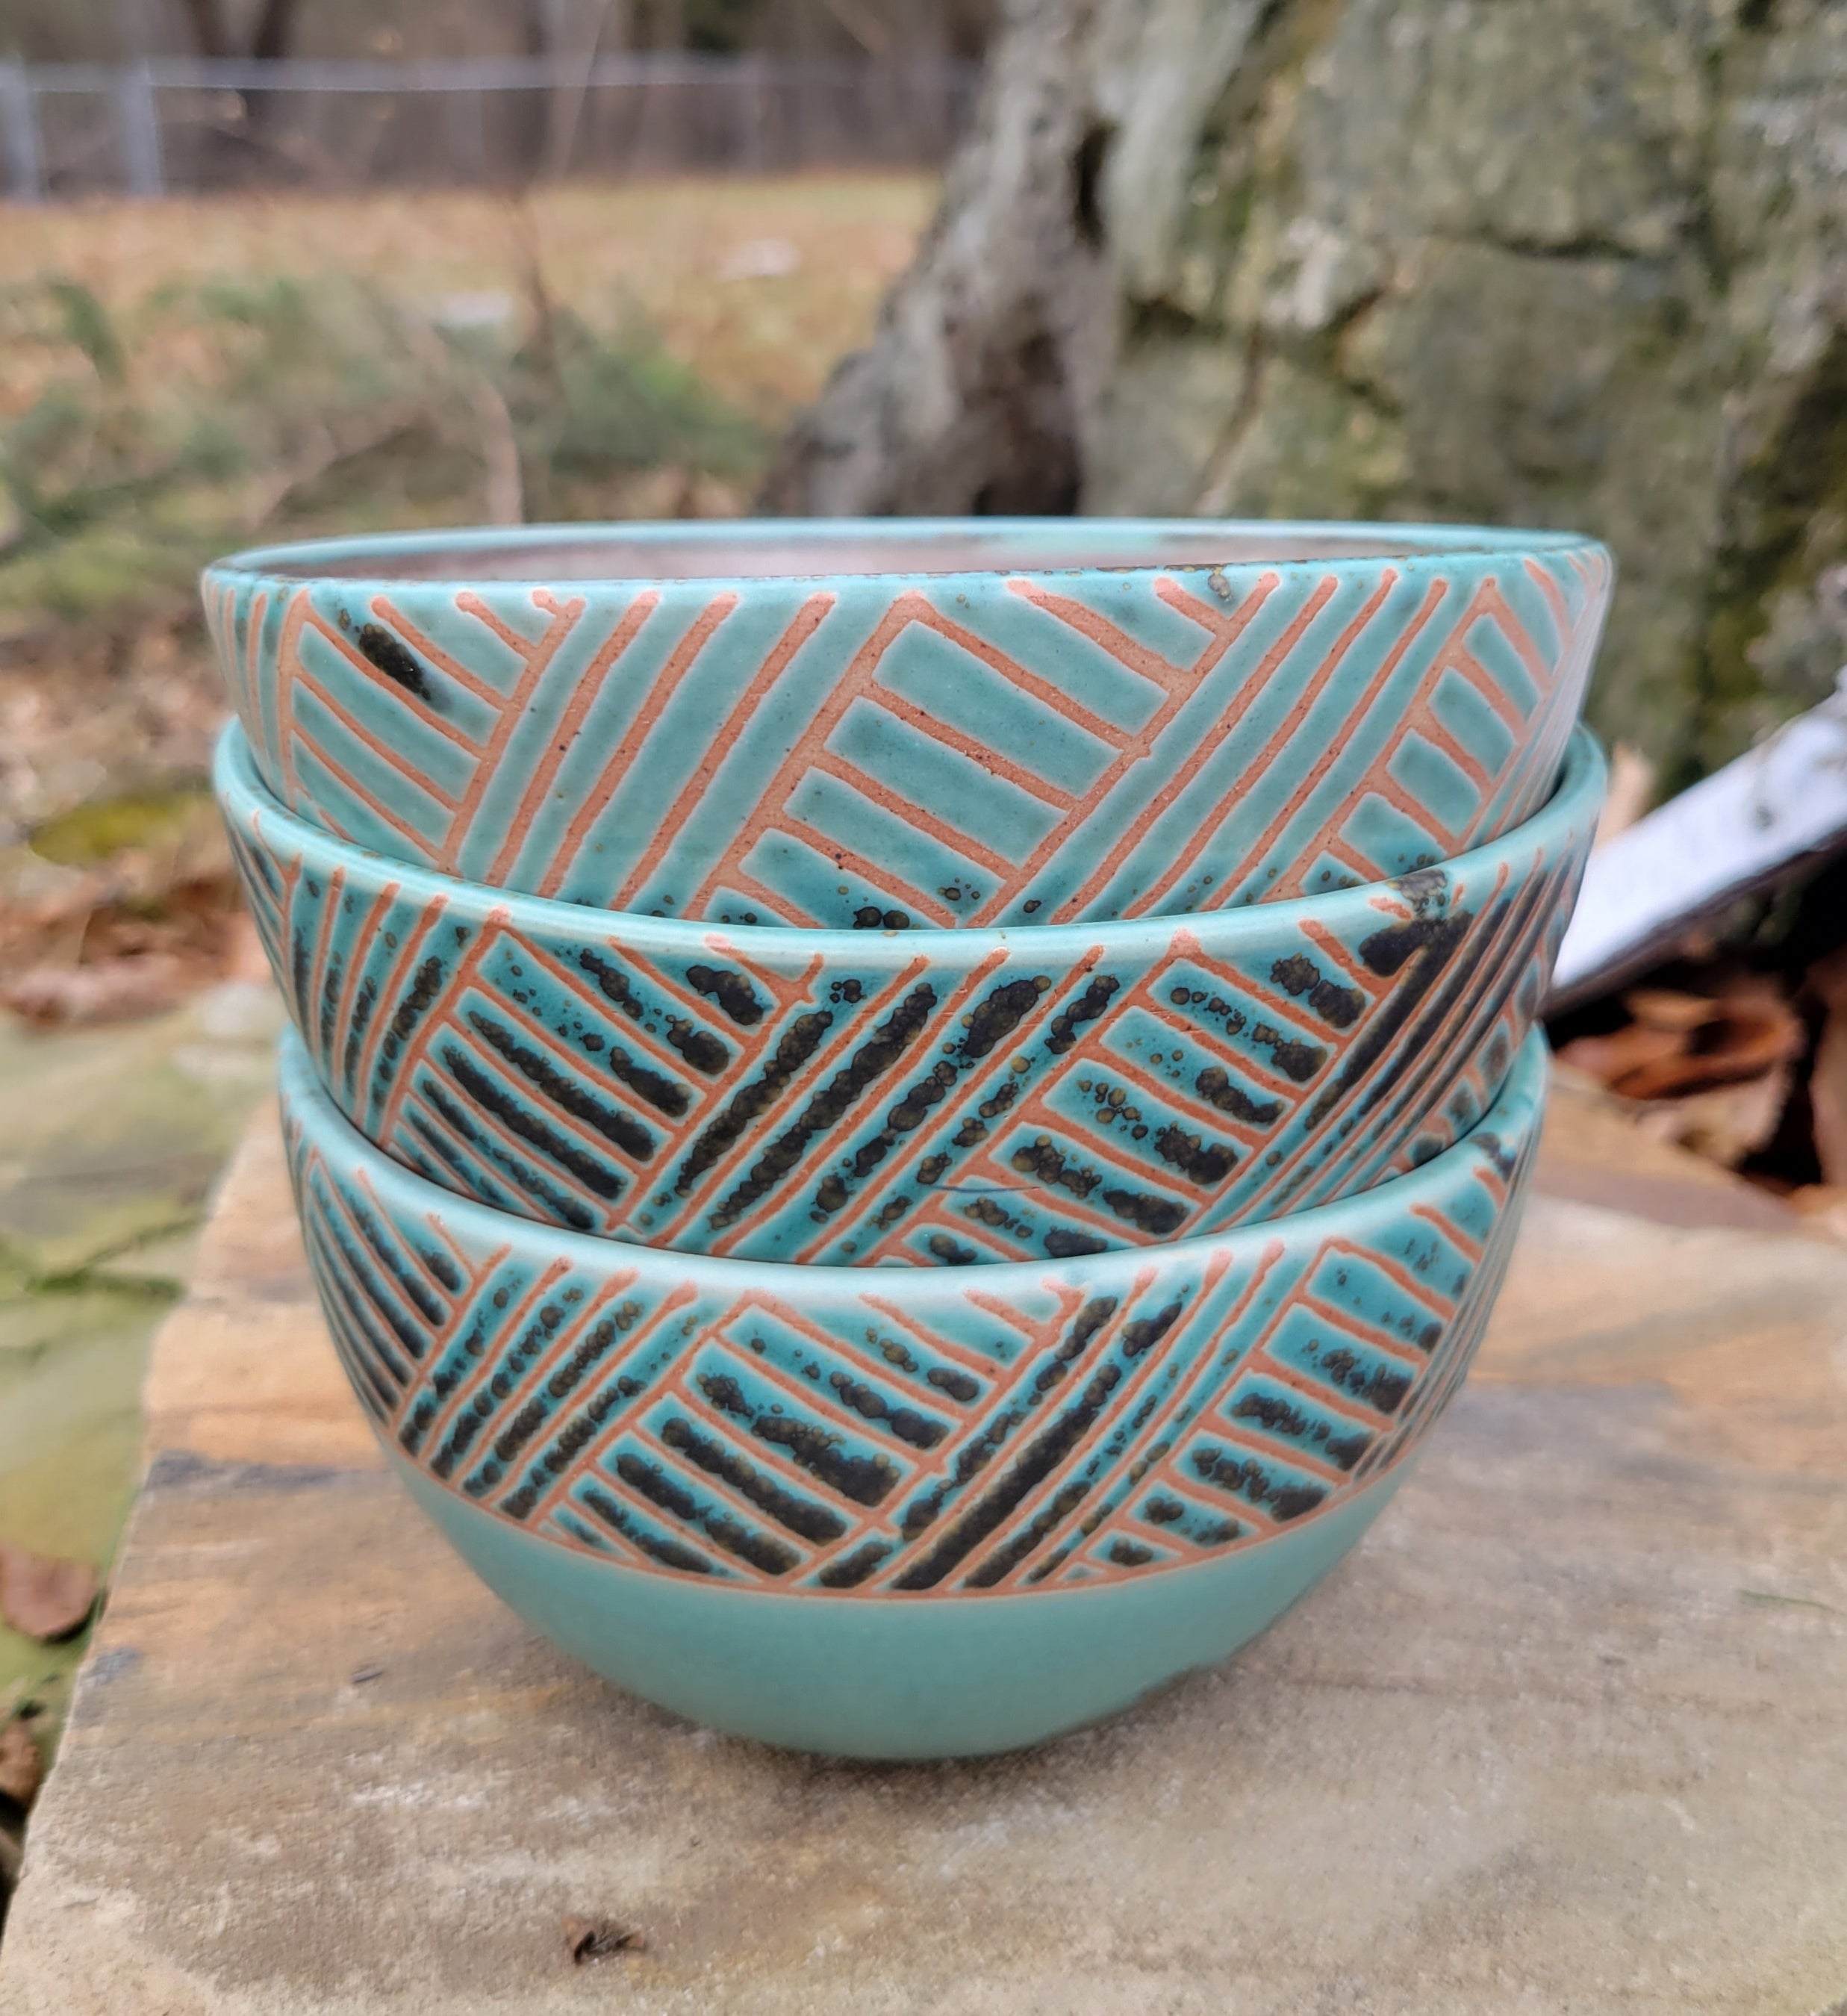 Cereal Bowl in Turquoise Basket Weave Pattern